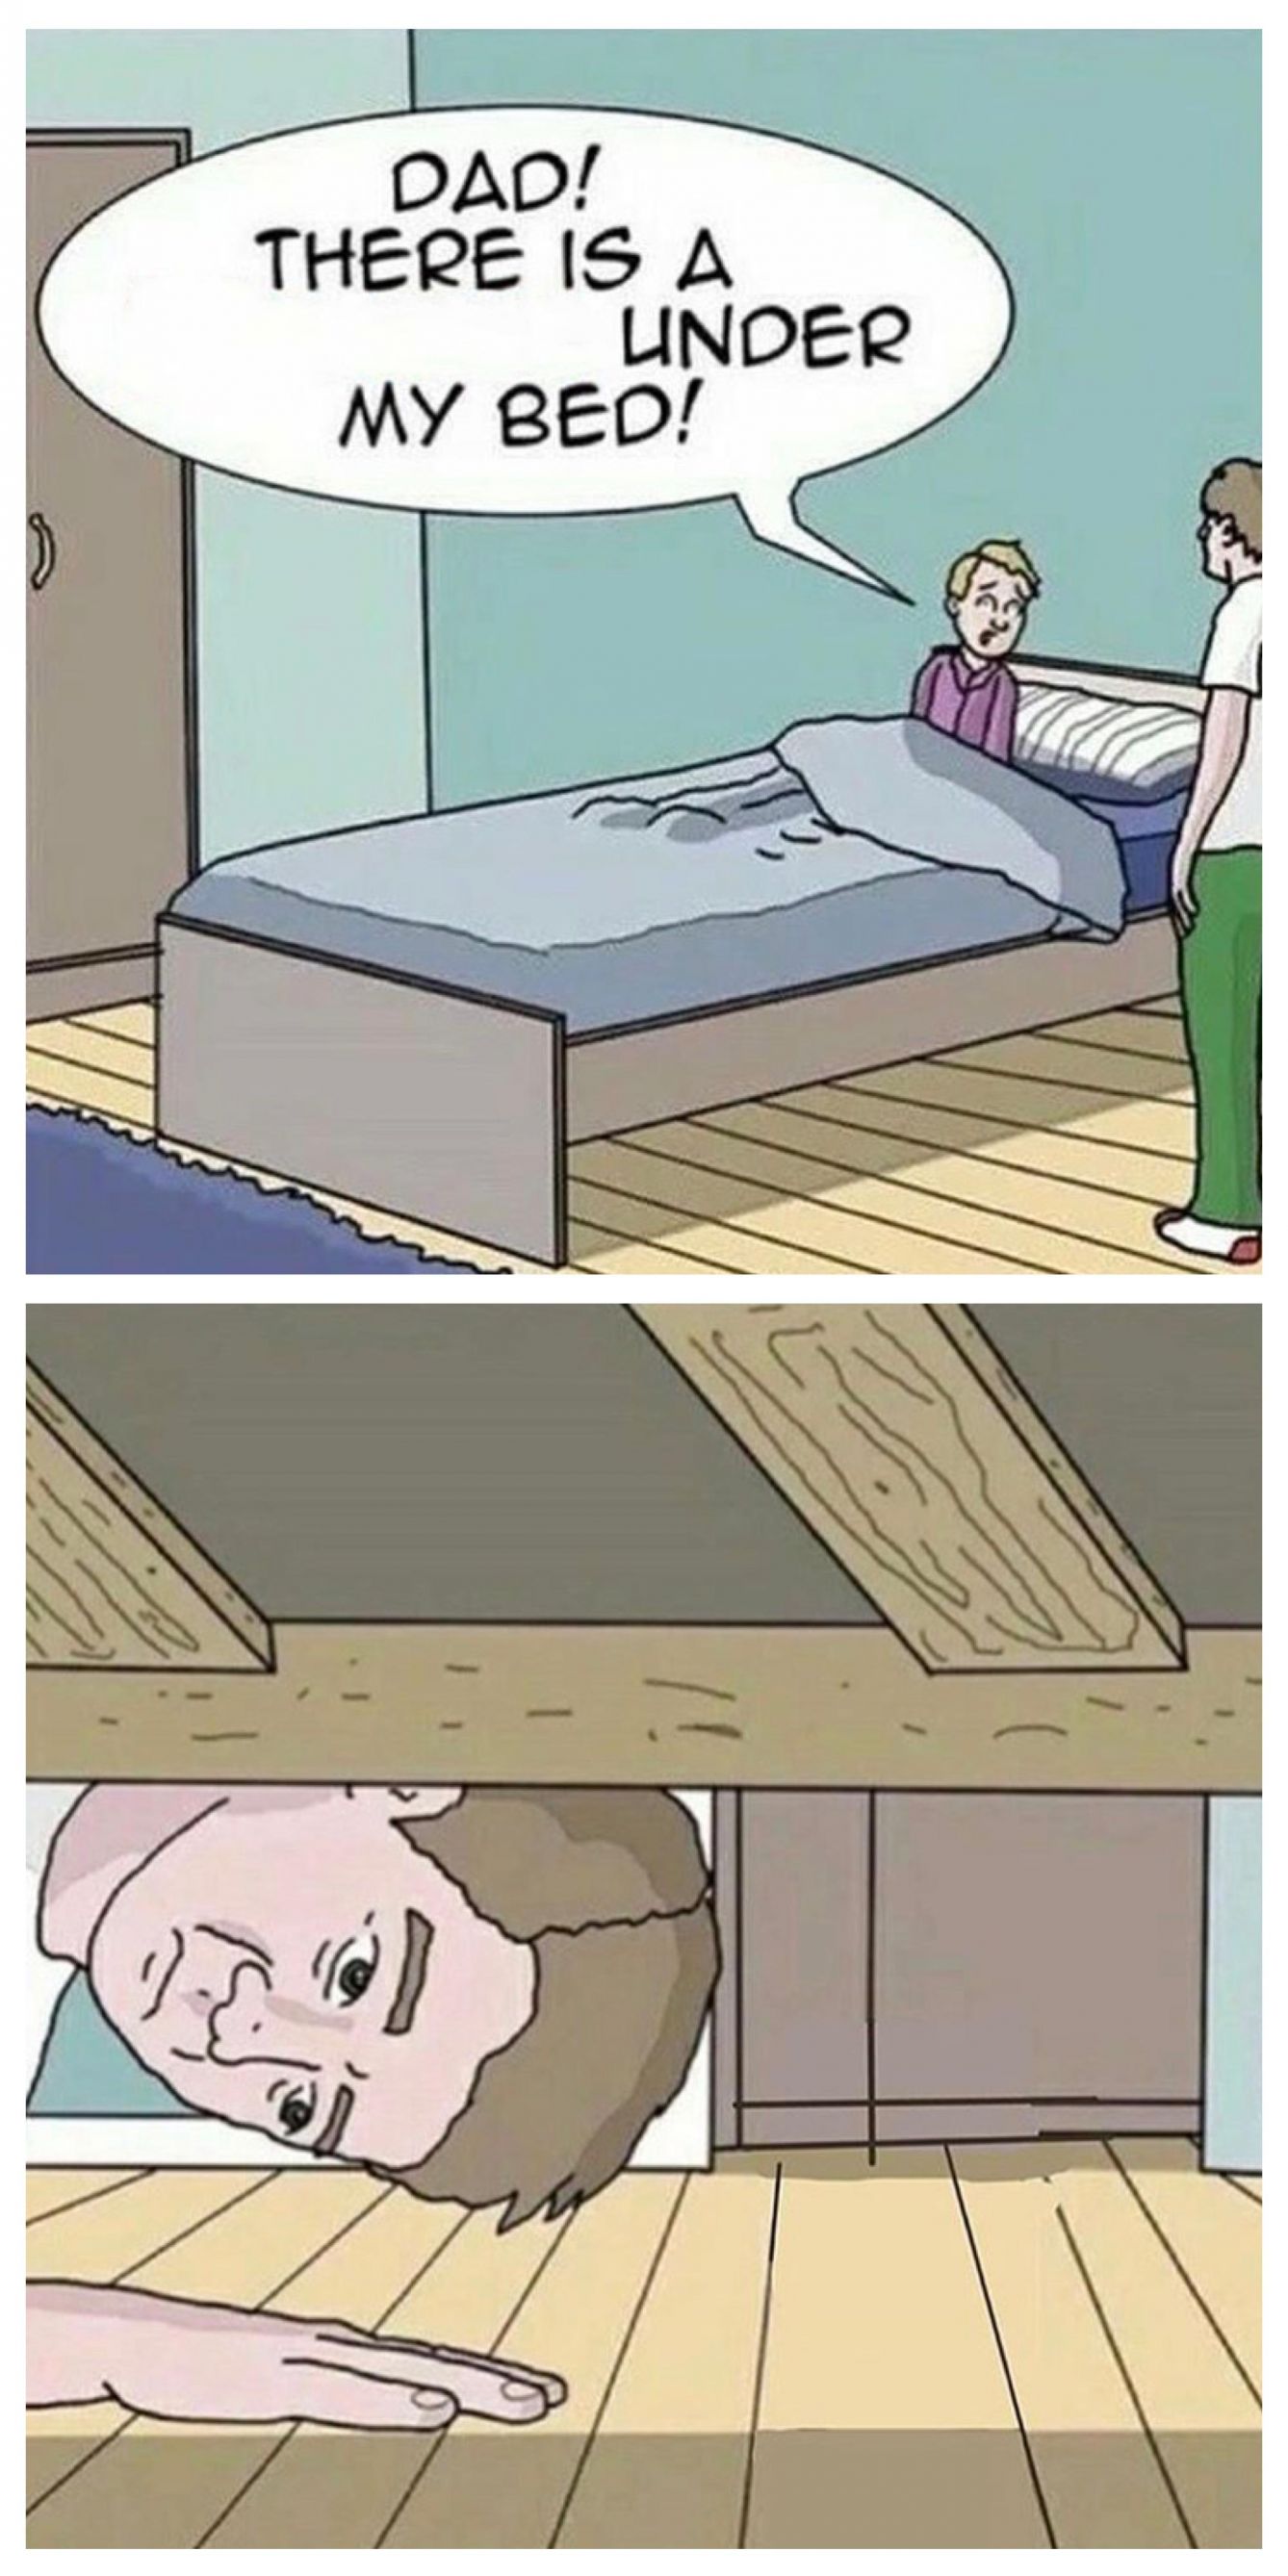 Dad! There is a monster under my bed Blank Meme Template